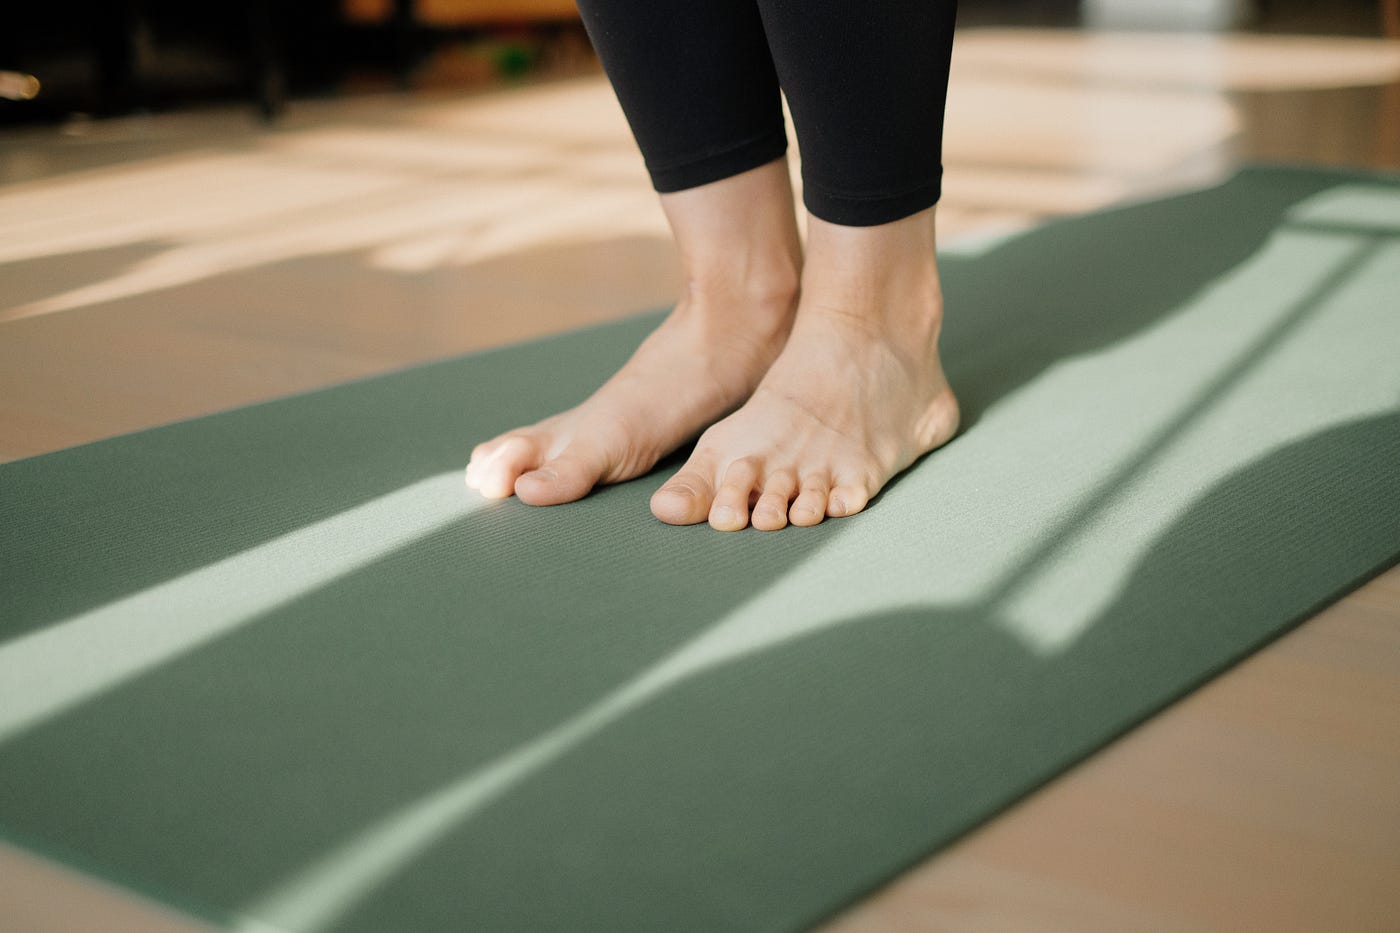 We see two feet on a yoga mat. Yoga or pilates can be excellent tools to enhance balance.